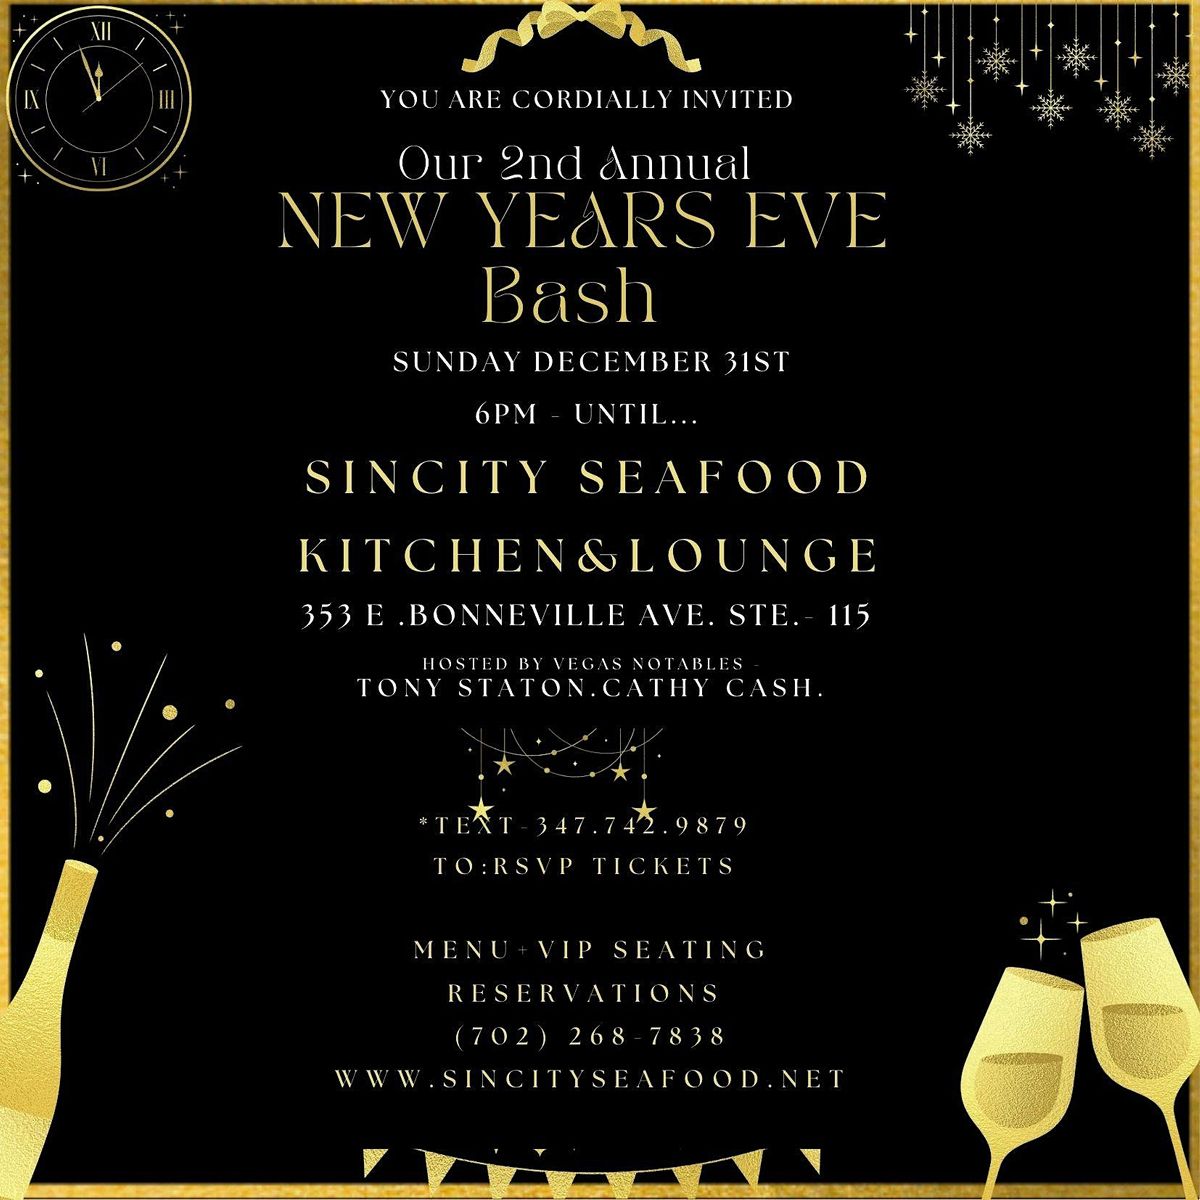 NEW YEARS EVE BASH @ SIN CITY SEAFOOD